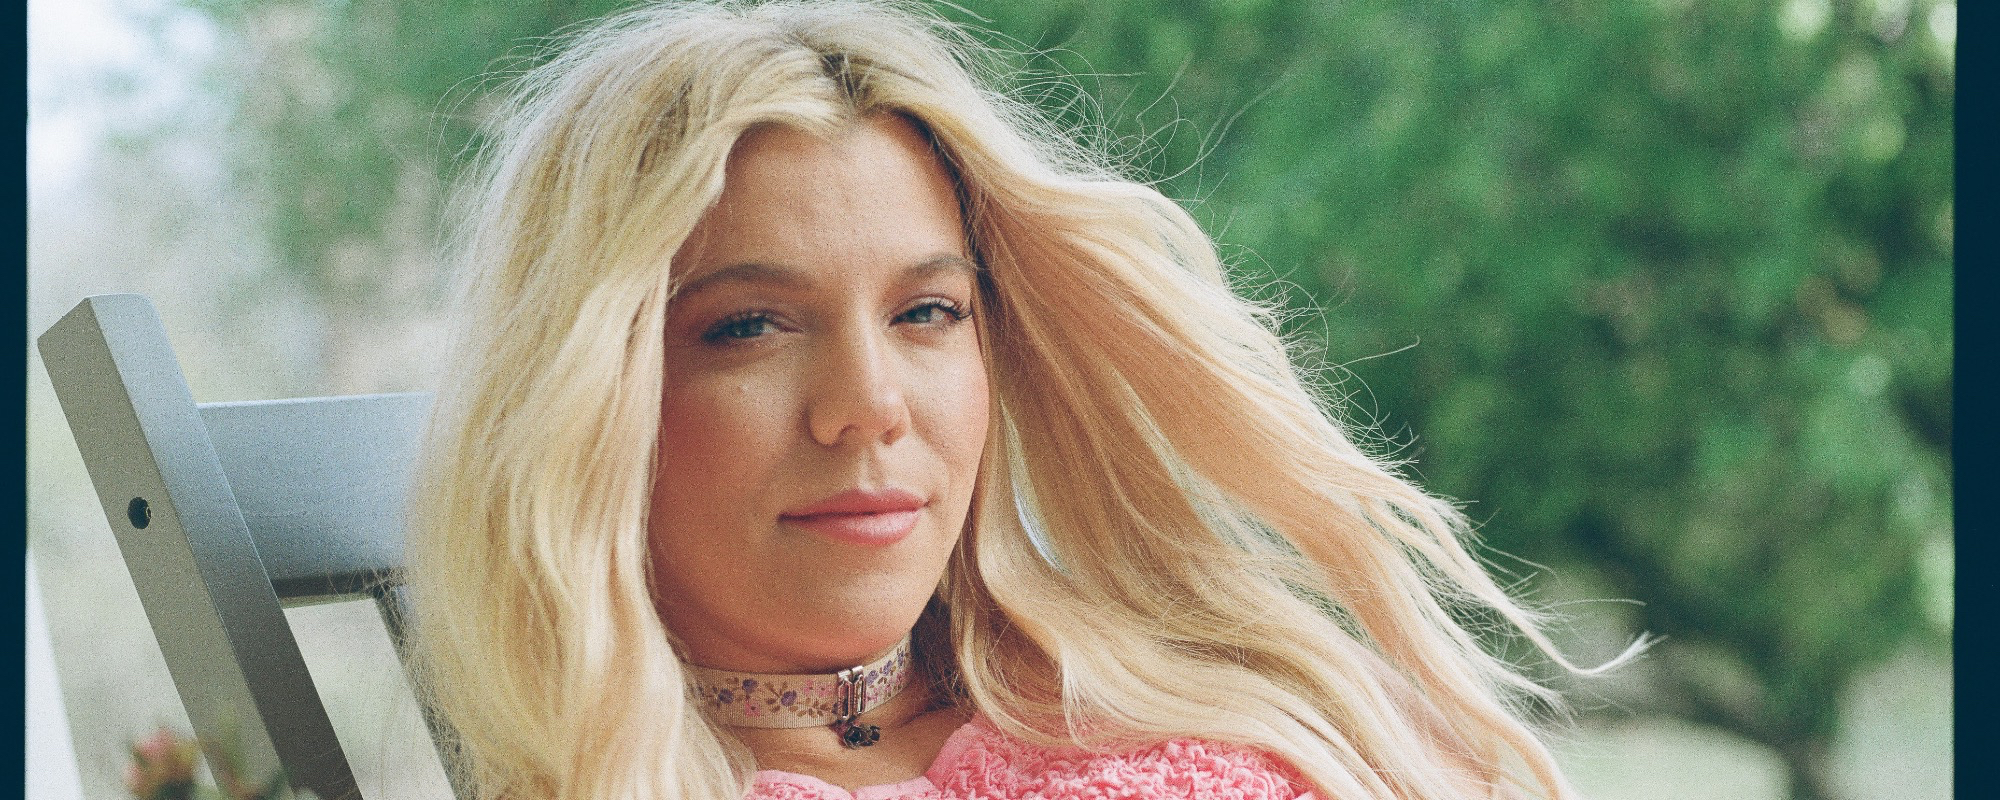 Kimberly Perry on ‘Bloom’ EP: “The Most Transparent Writing I’ve Done”